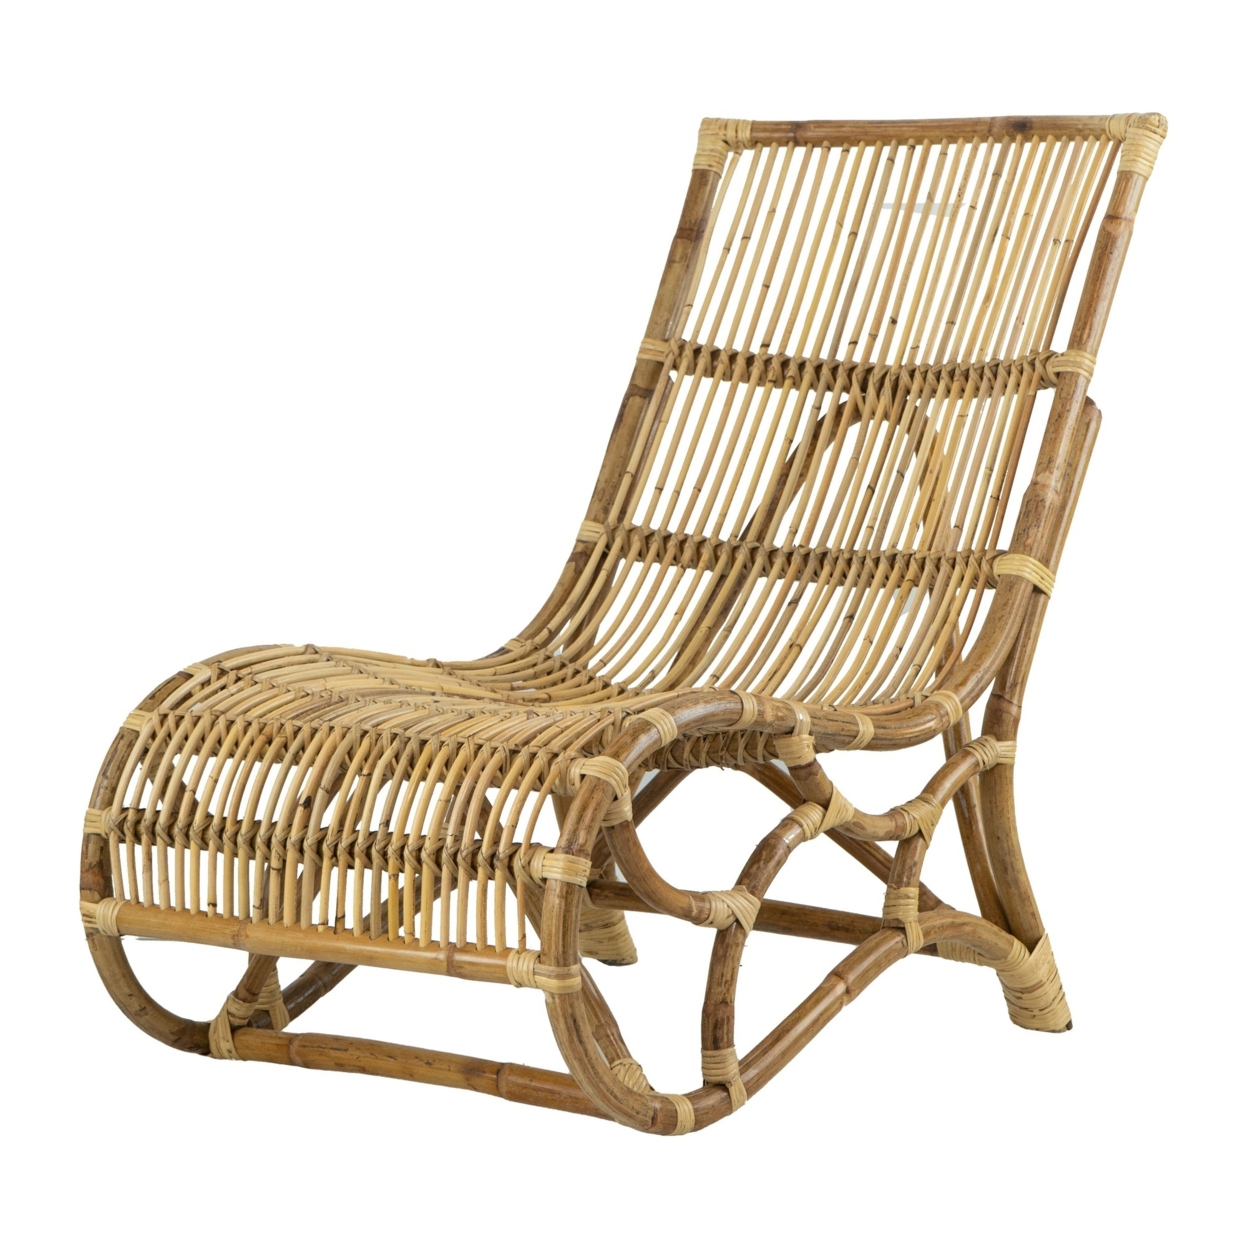 35 Inch Retro Style Rattan Lounge Chair, Slatted Support, Natural Brown- Saltoro Sherpi